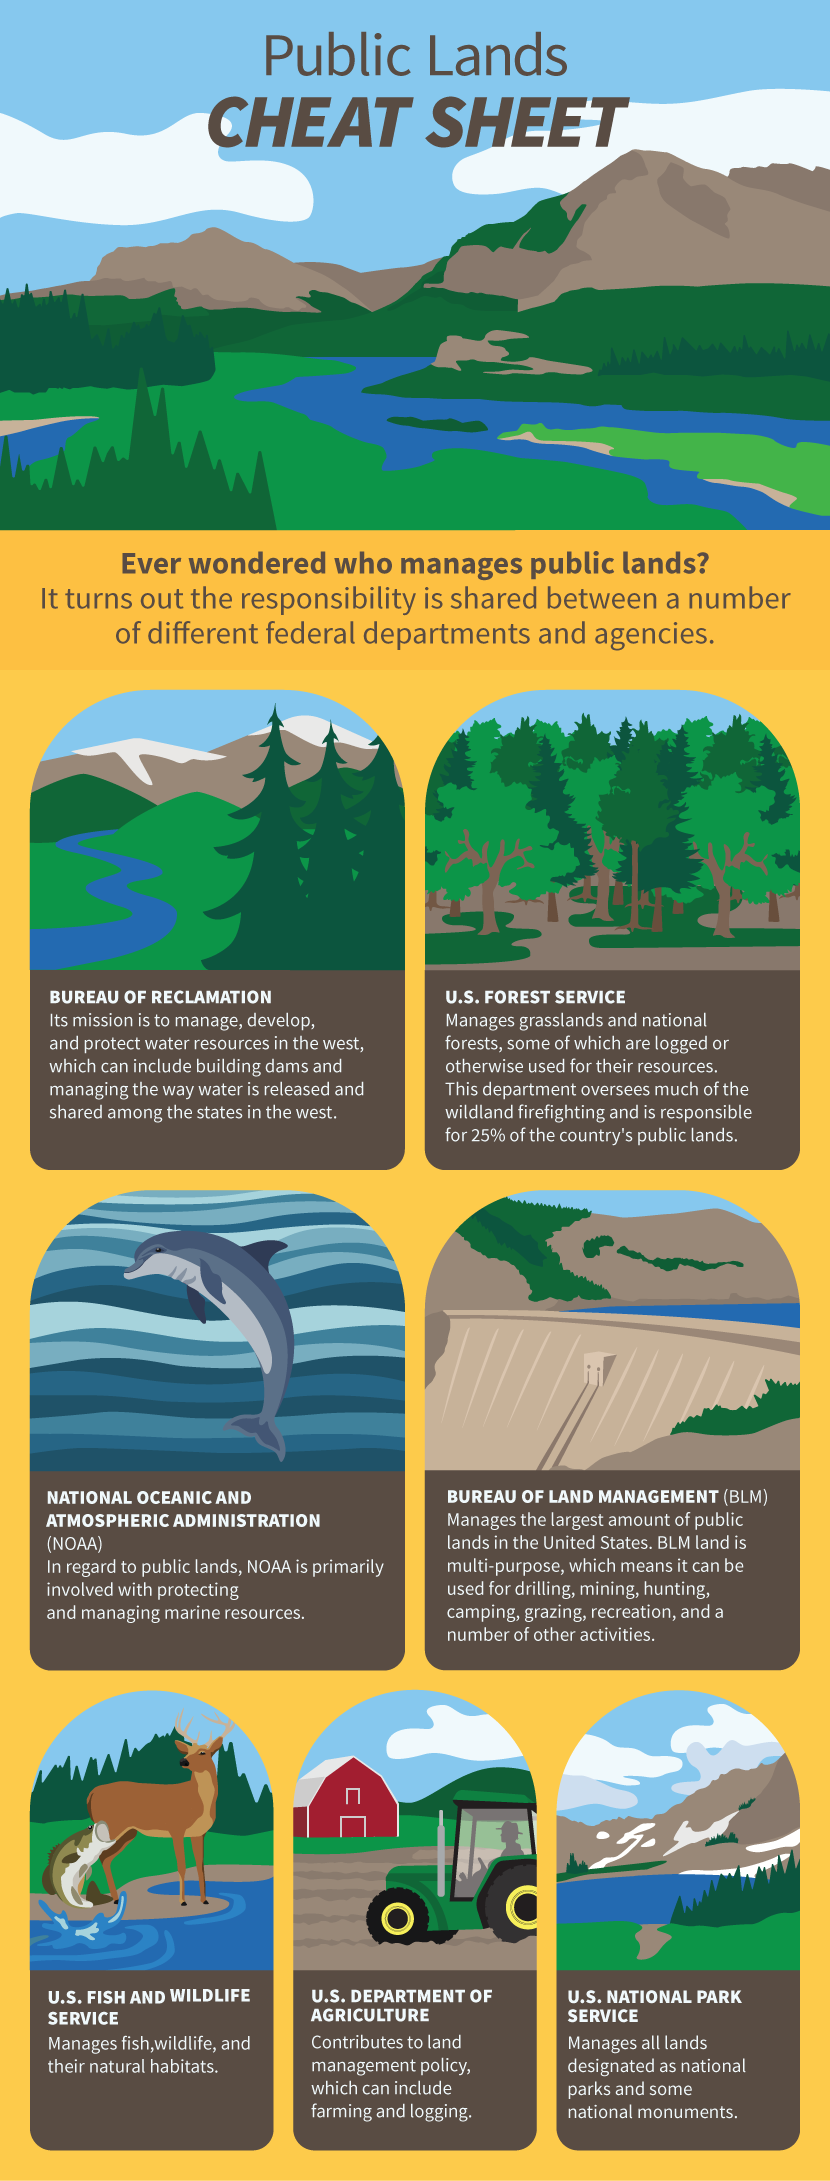 Public Lands Cheat Sheet - Overcrowding in the Wilderness